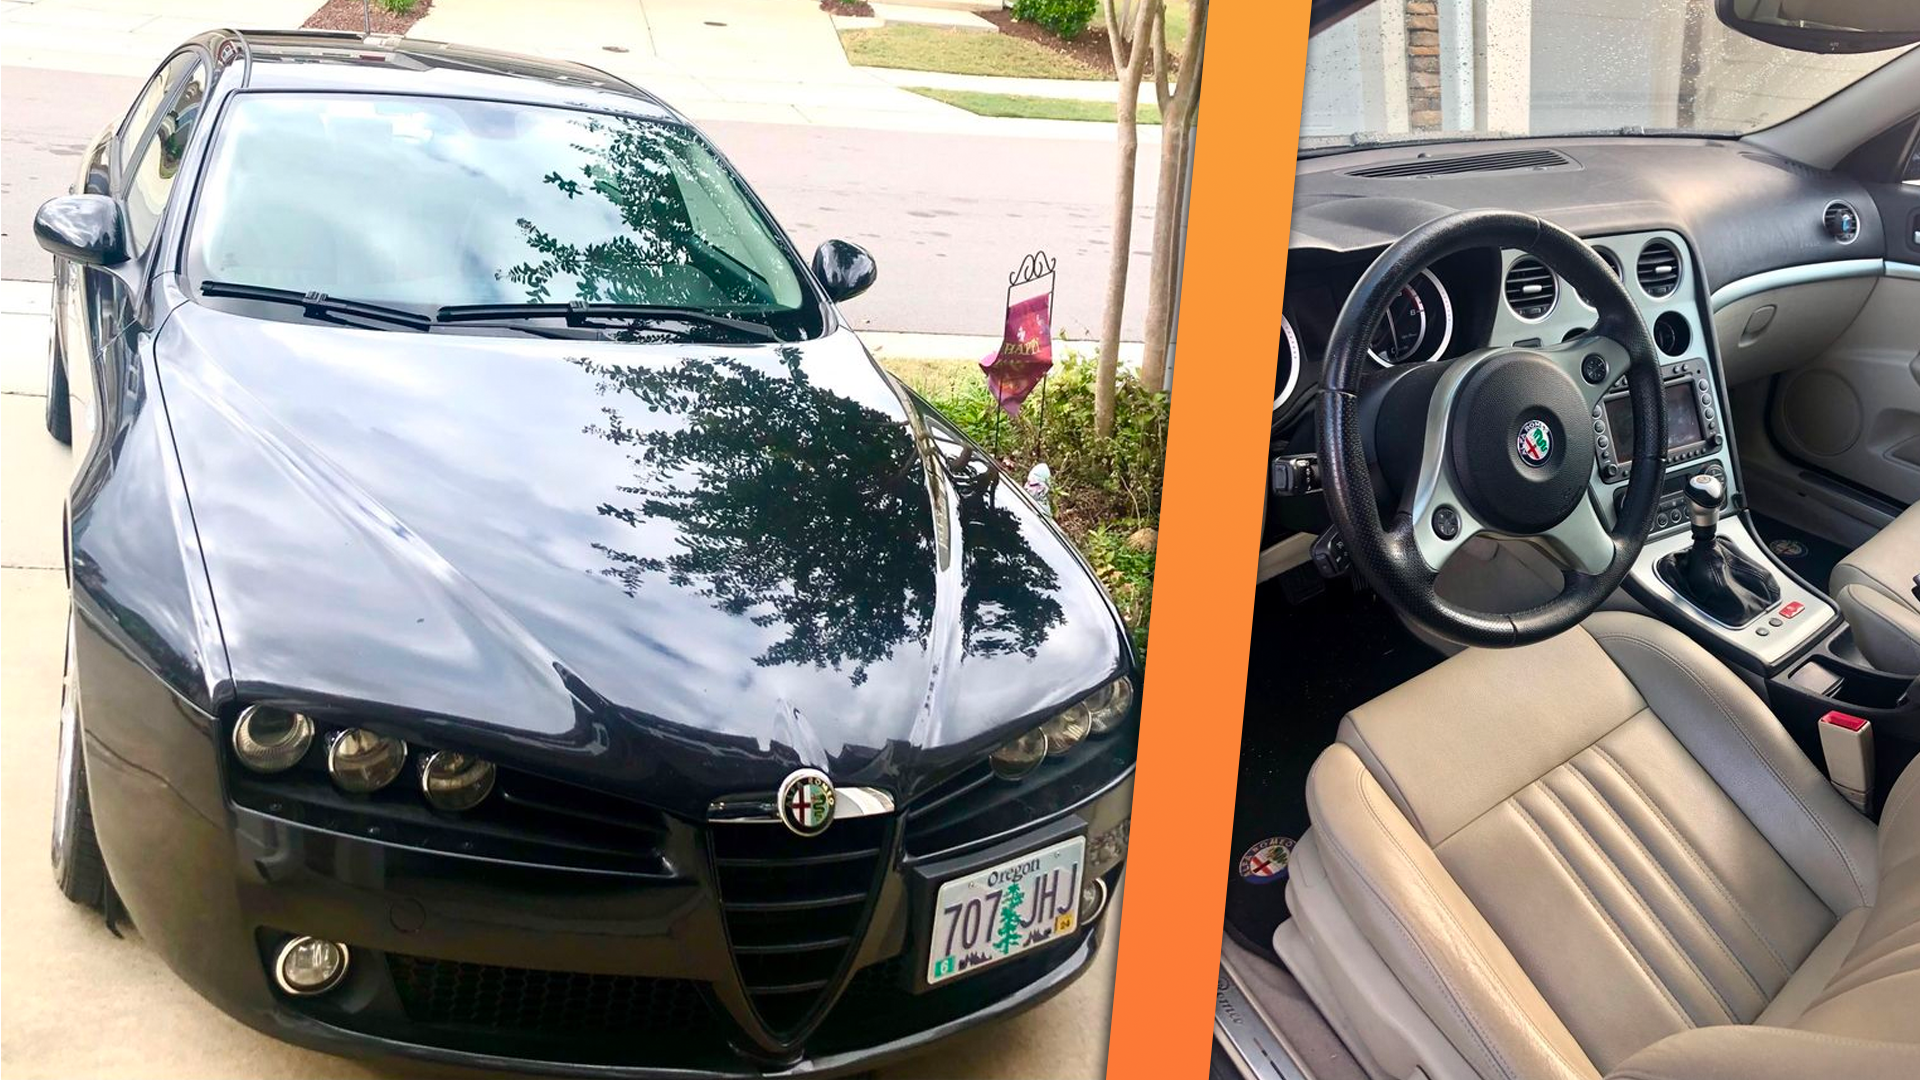 Supposedly Legal 2009 Alfa Romeo 159 For Sale Could Be Your Best